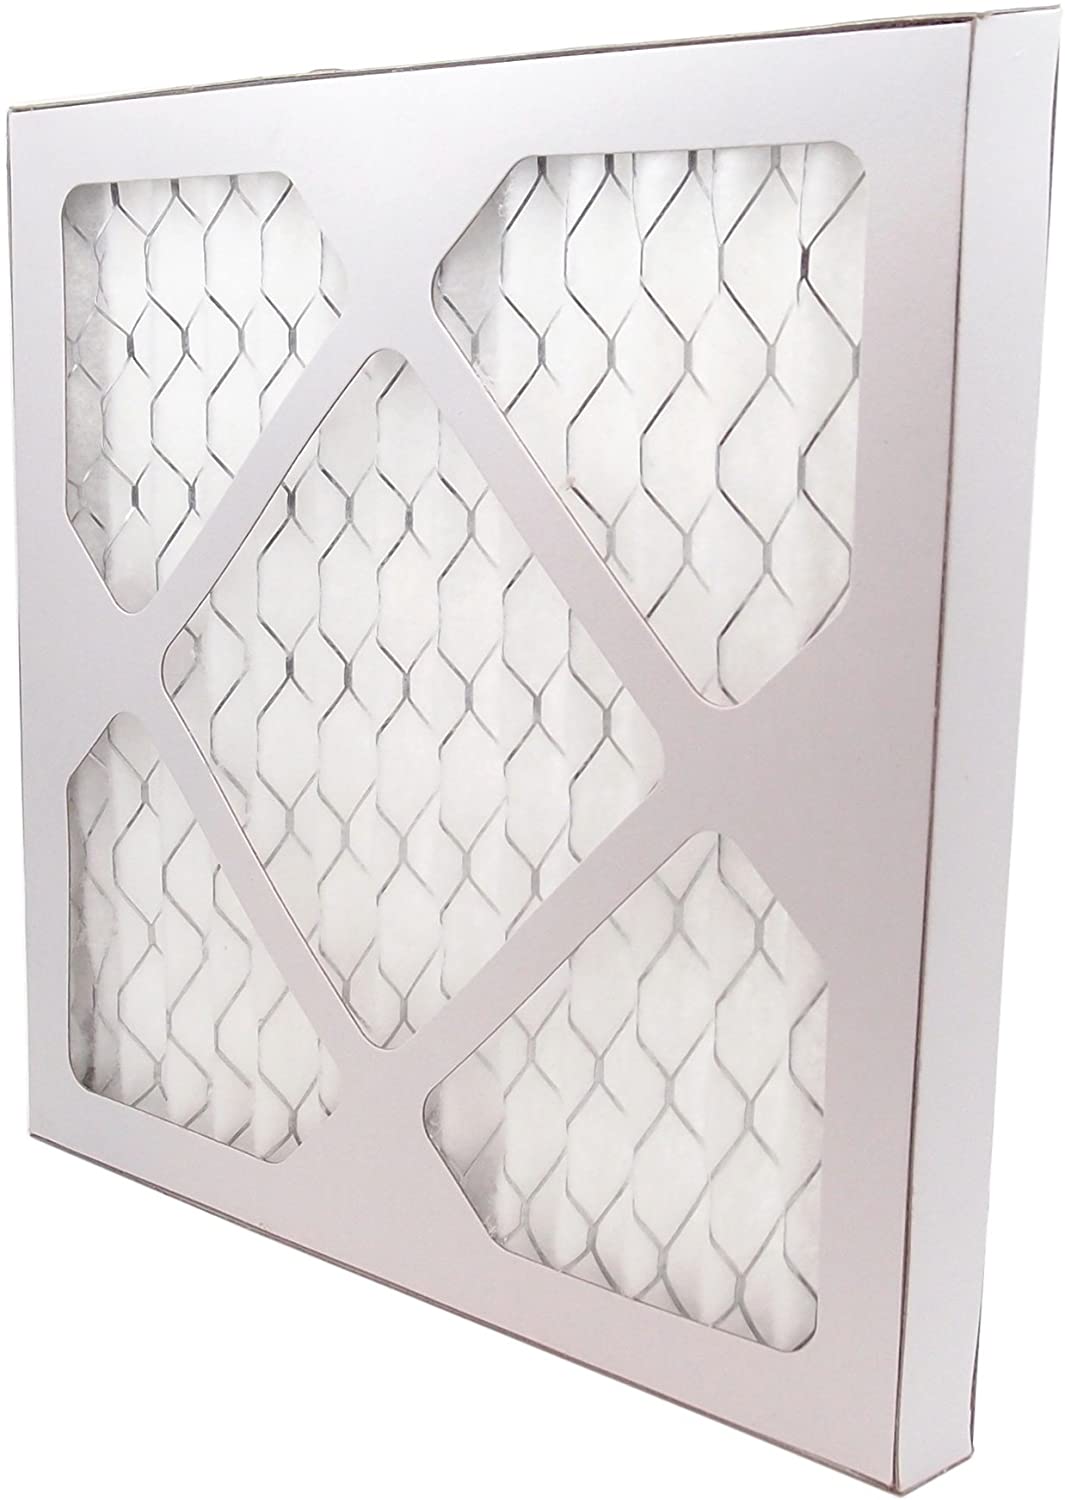 14&quot; x 20&quot; Pleated MERV 8 Filter for HVAC Return Filter Grille [Actual Dimensions: 13.75 X 19.75] 3-Pack